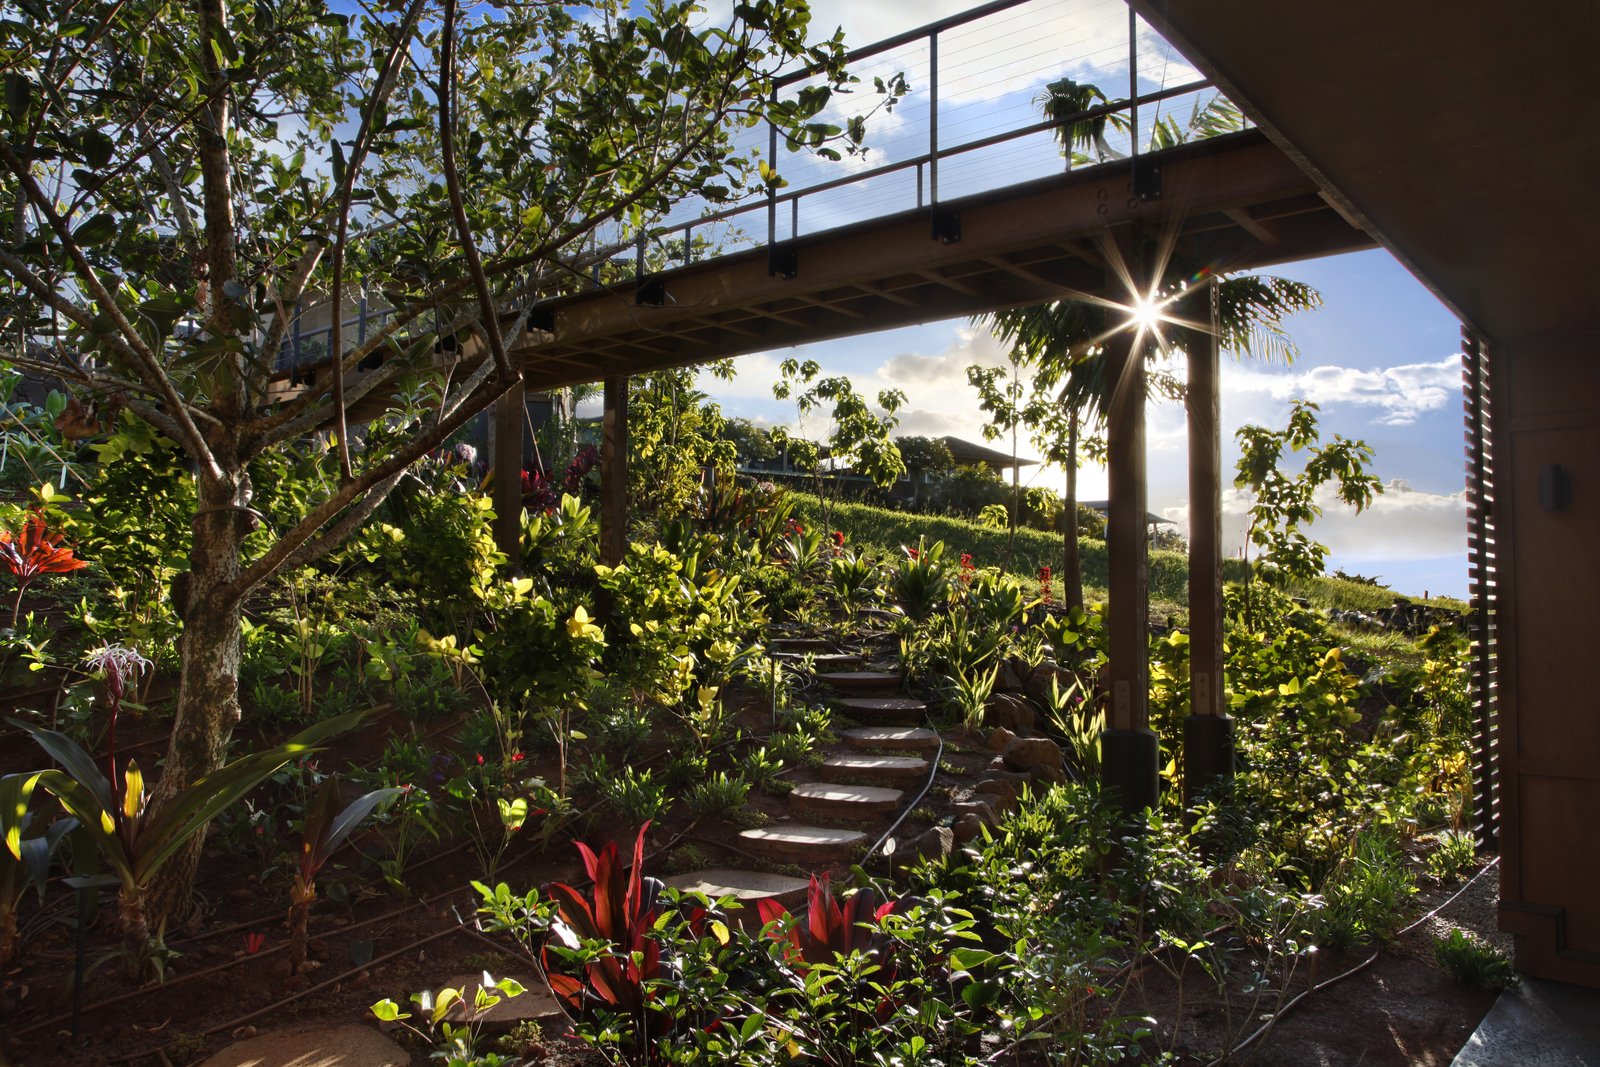 Lush Garden Walkway with Raised Bridge to Main Entry and cable Railings